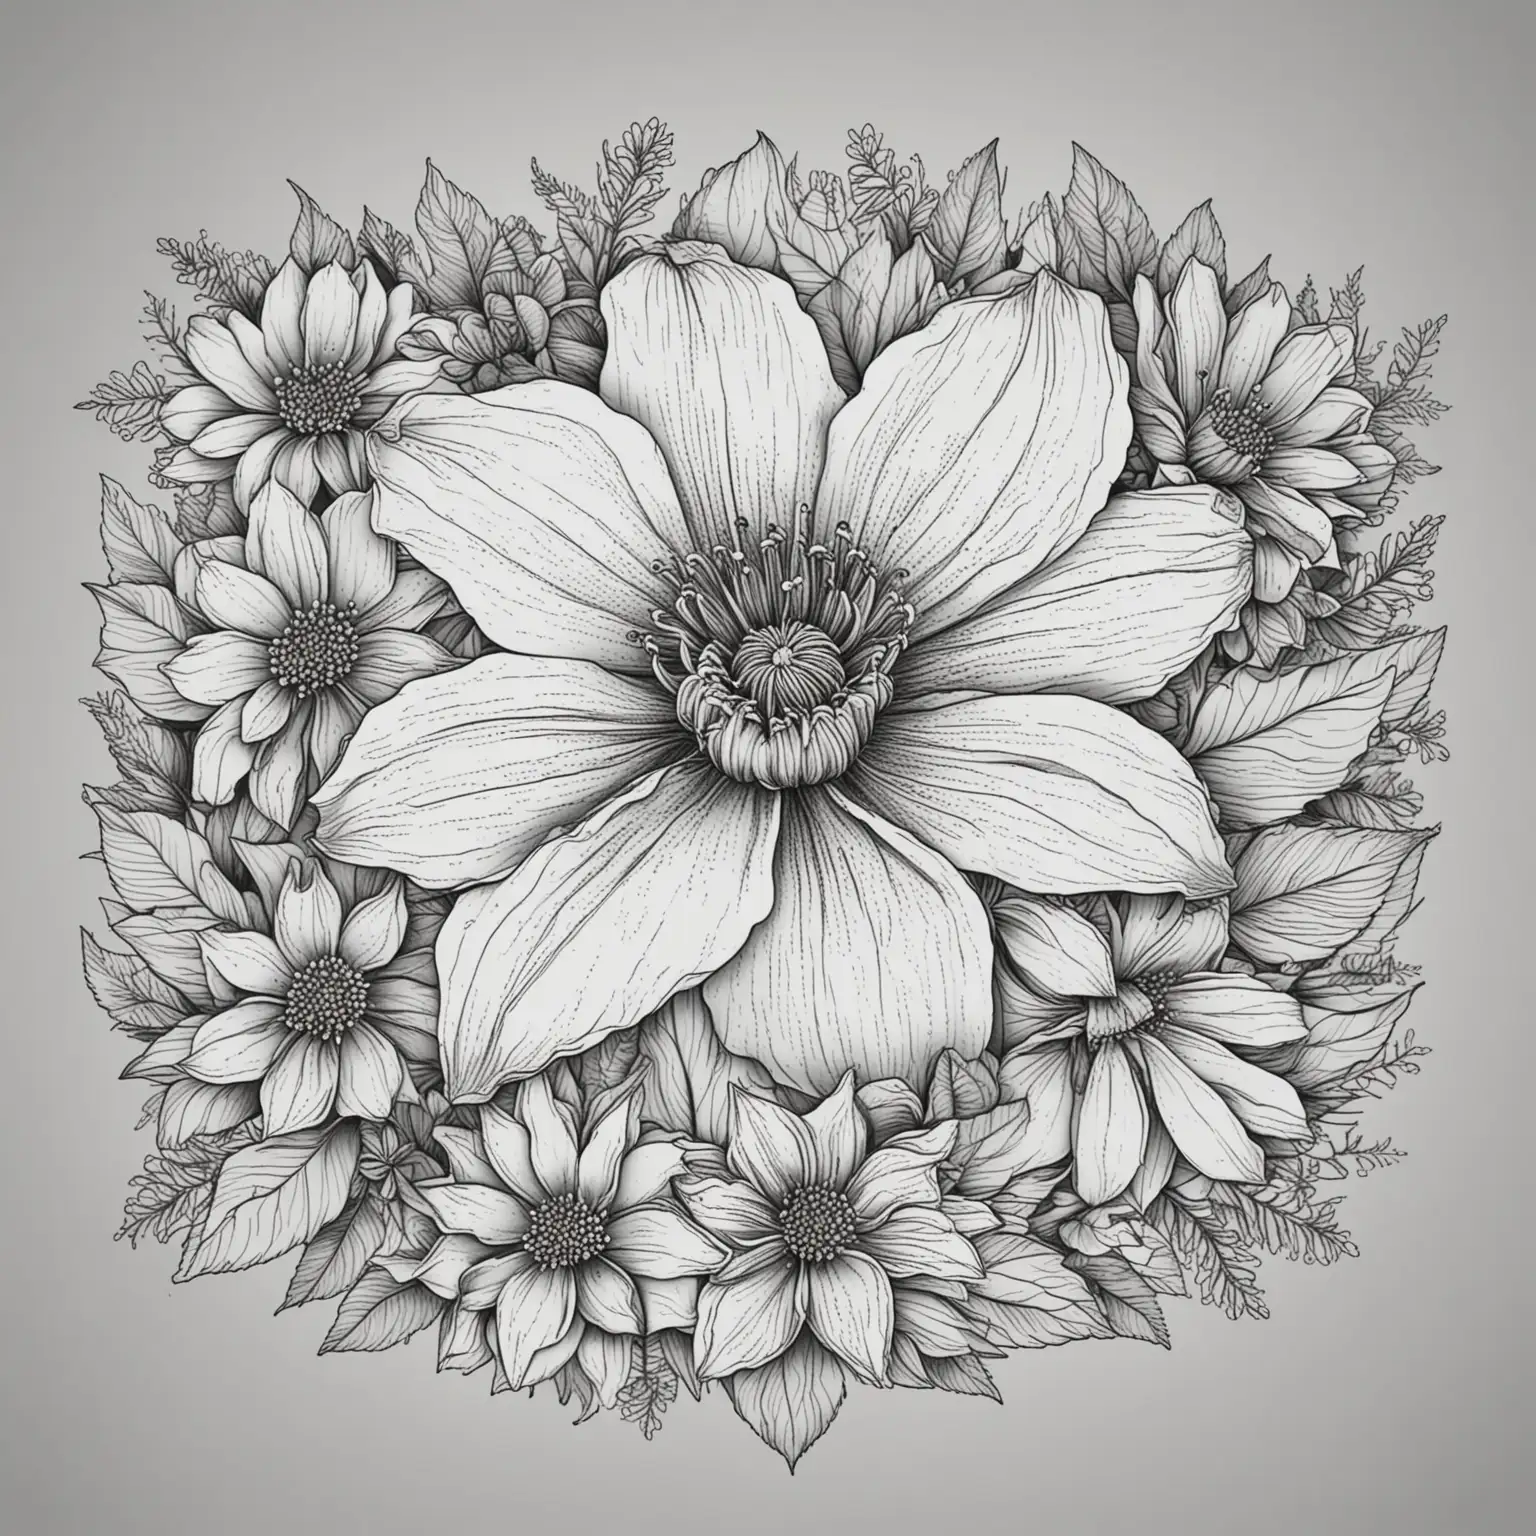 generate botanical flowers  for a coloring book. it shall contain bright colors with a white background